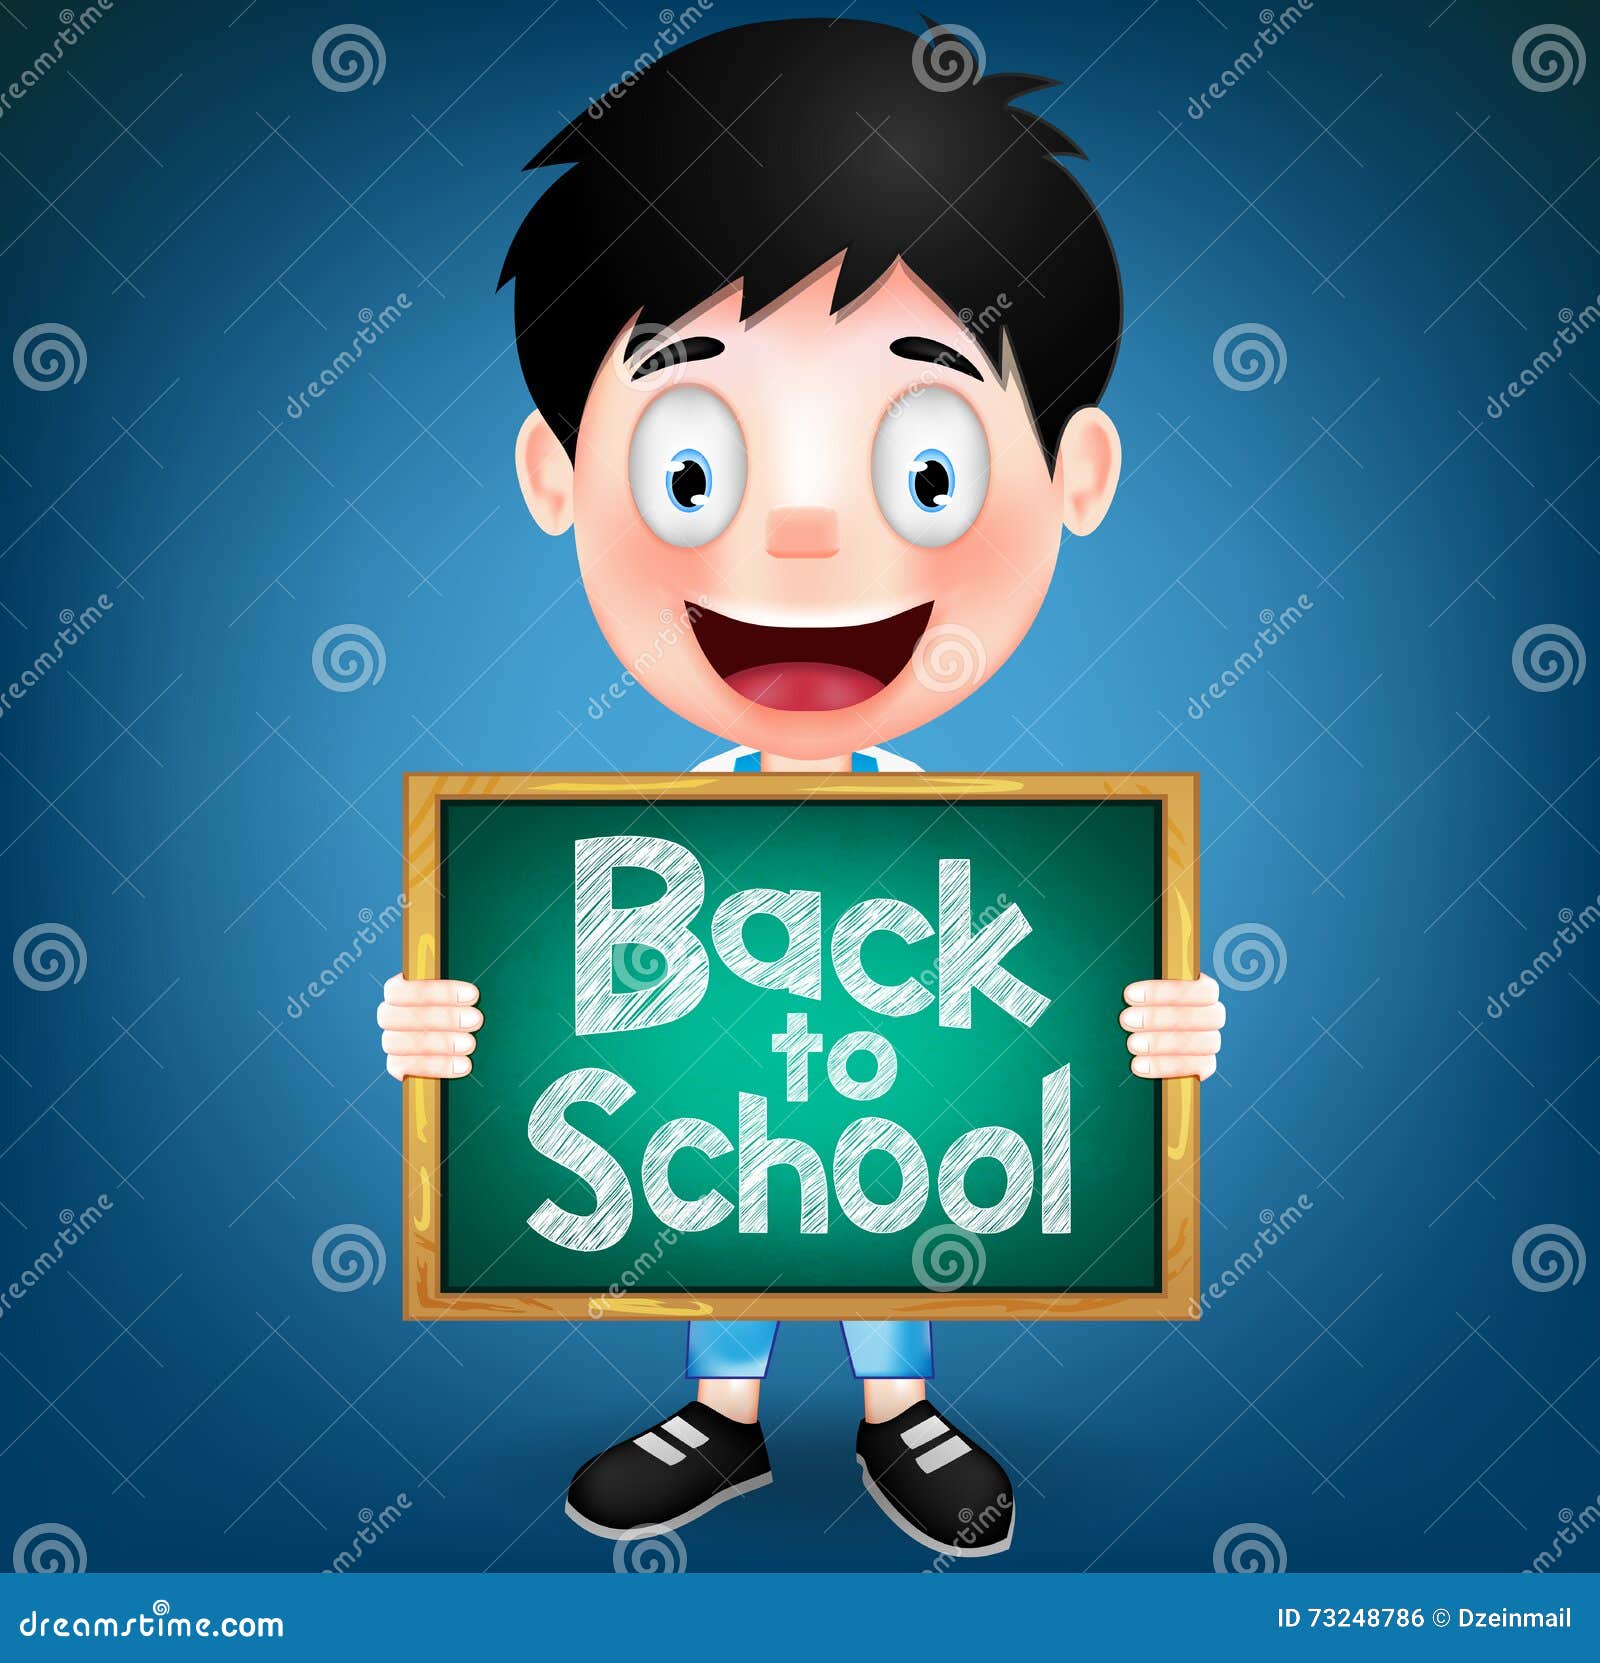 smiling boy student character holding green chalkboard